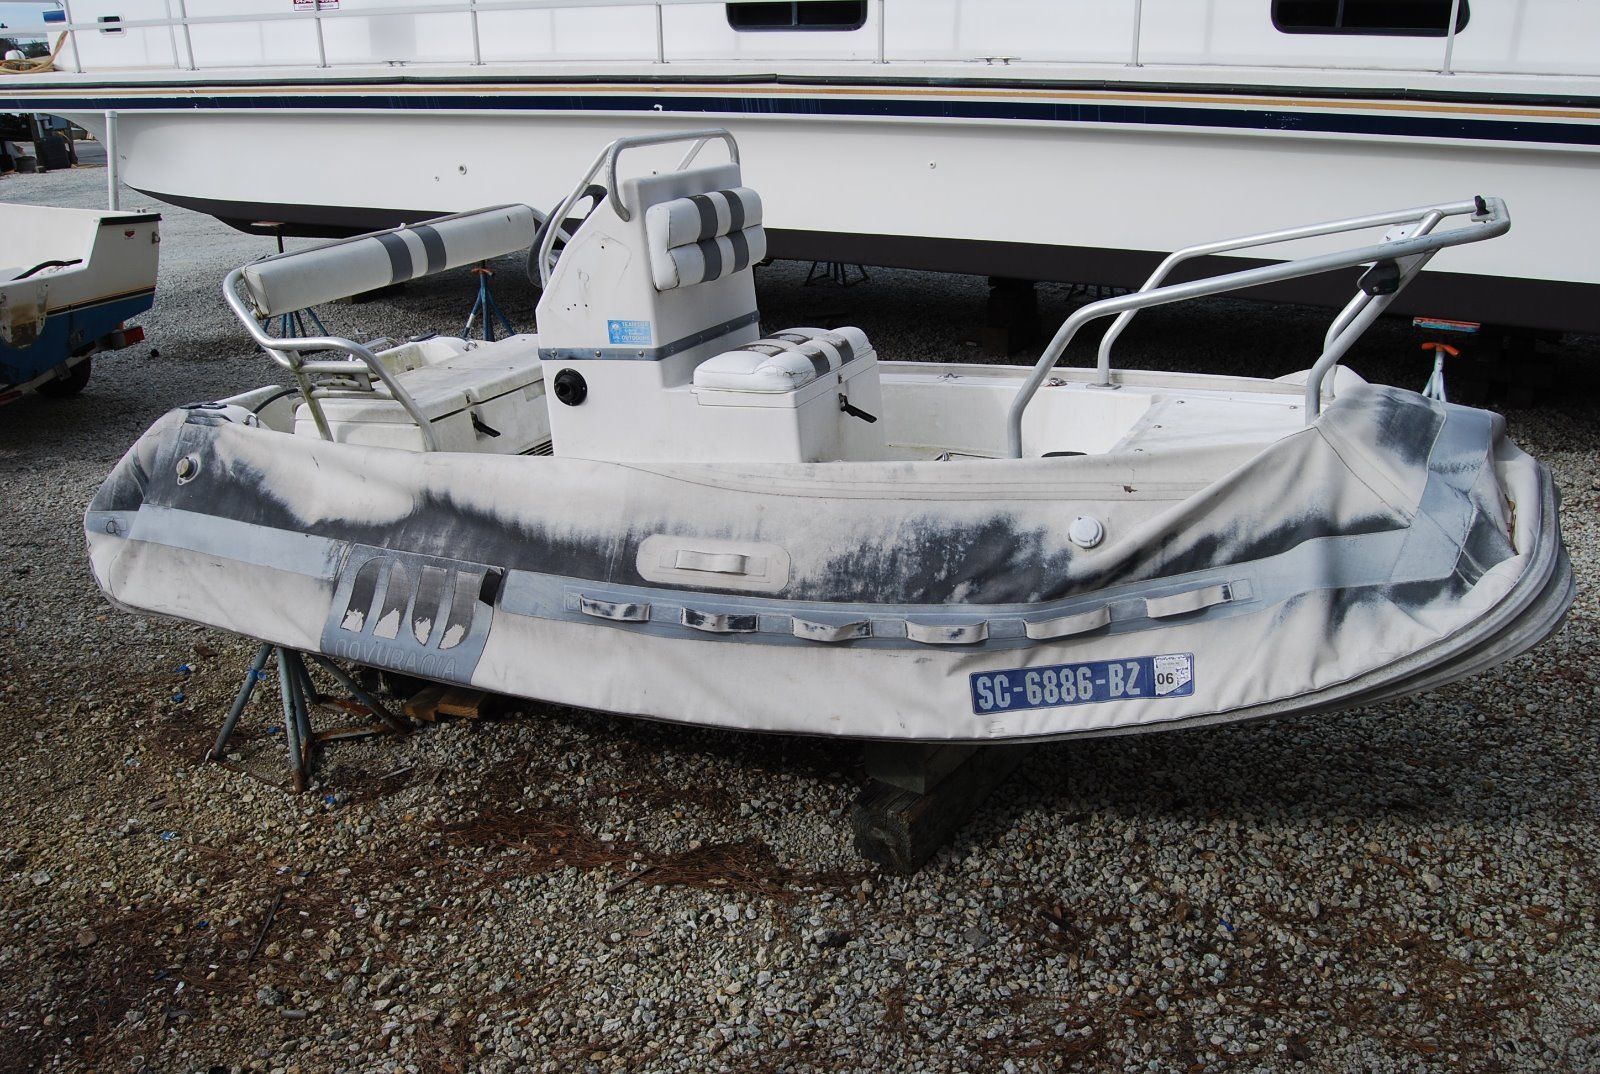 Novurania 450 DL 1995 for sale for $250 - Boats-from-USA.com